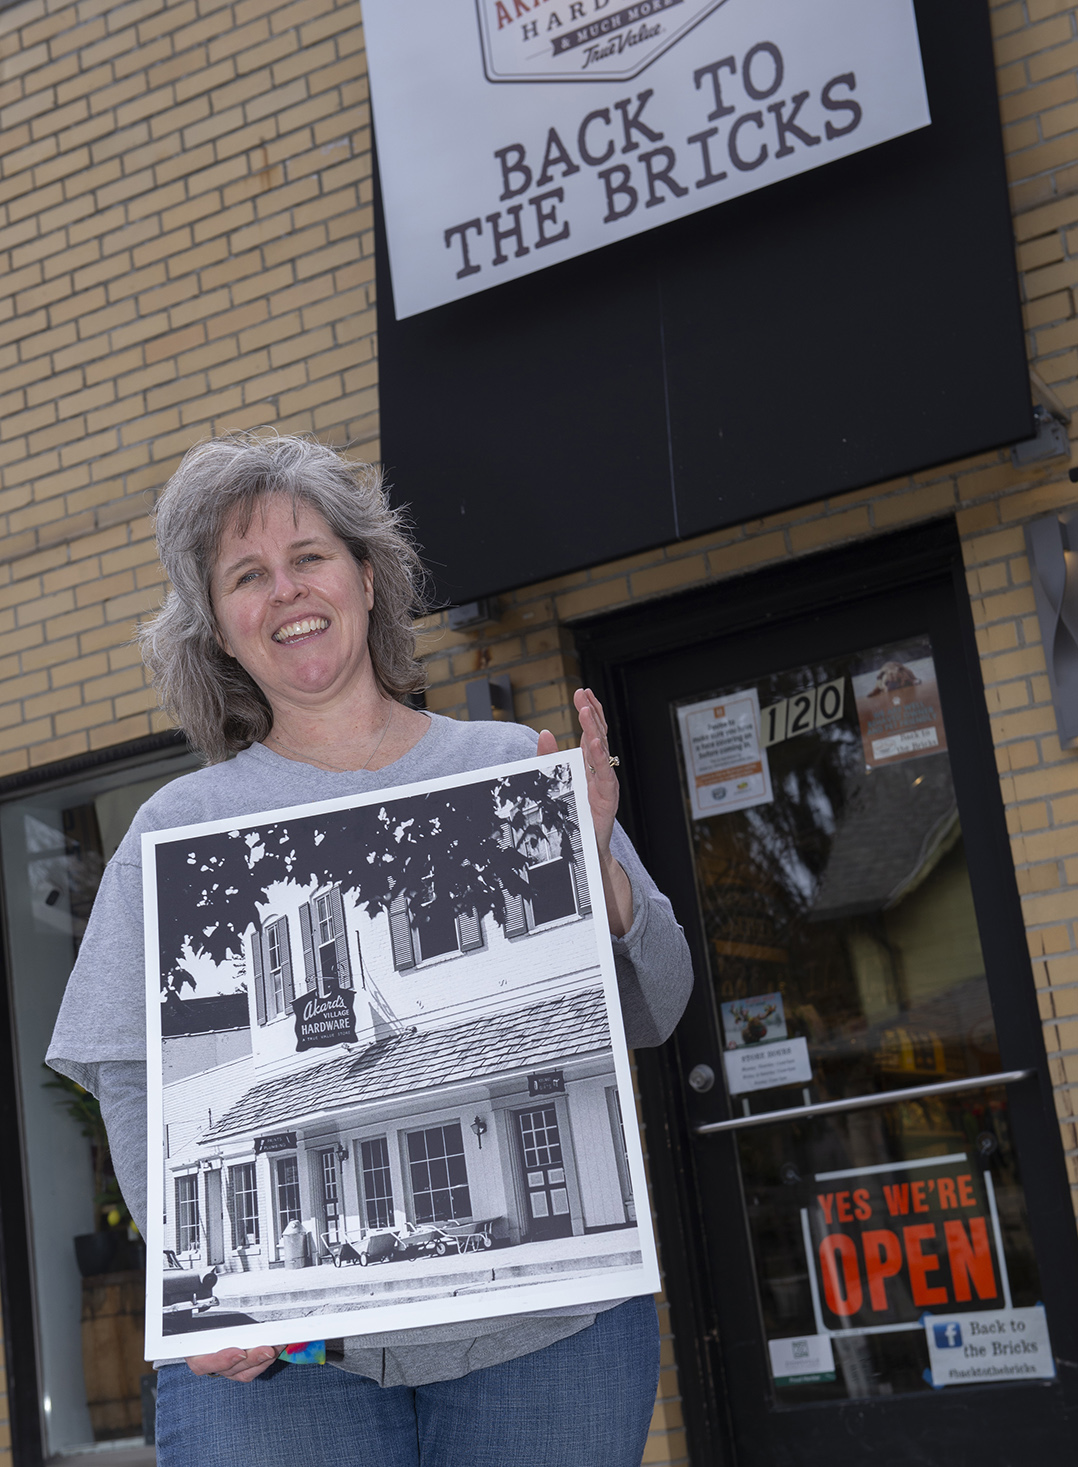 End of an era: Akard family begins new chapter after selling hardware store